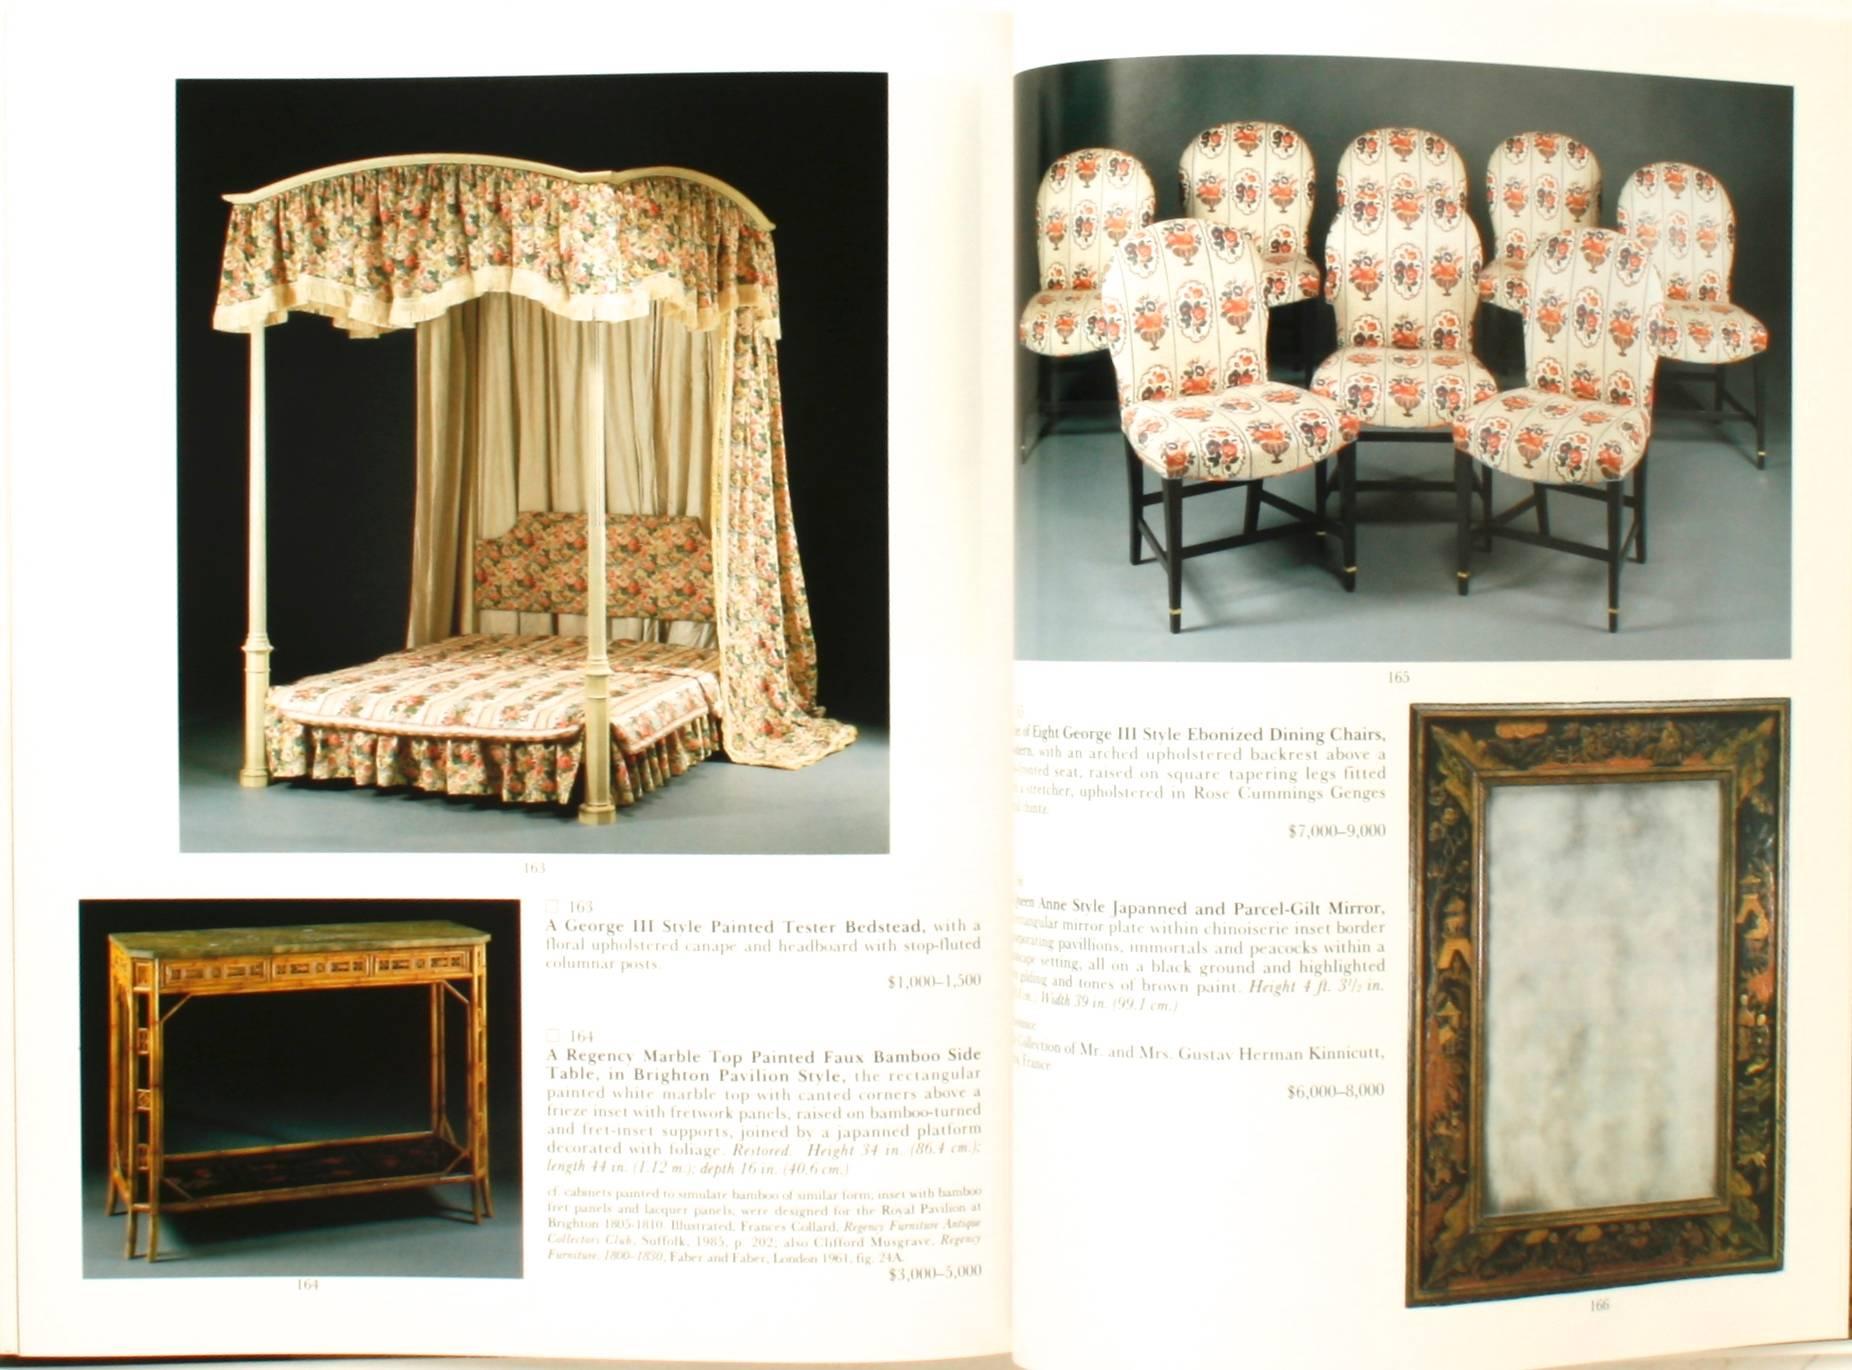 Sotheby's Property from the Collection of the Late Sister Parish, 9/29/95 1